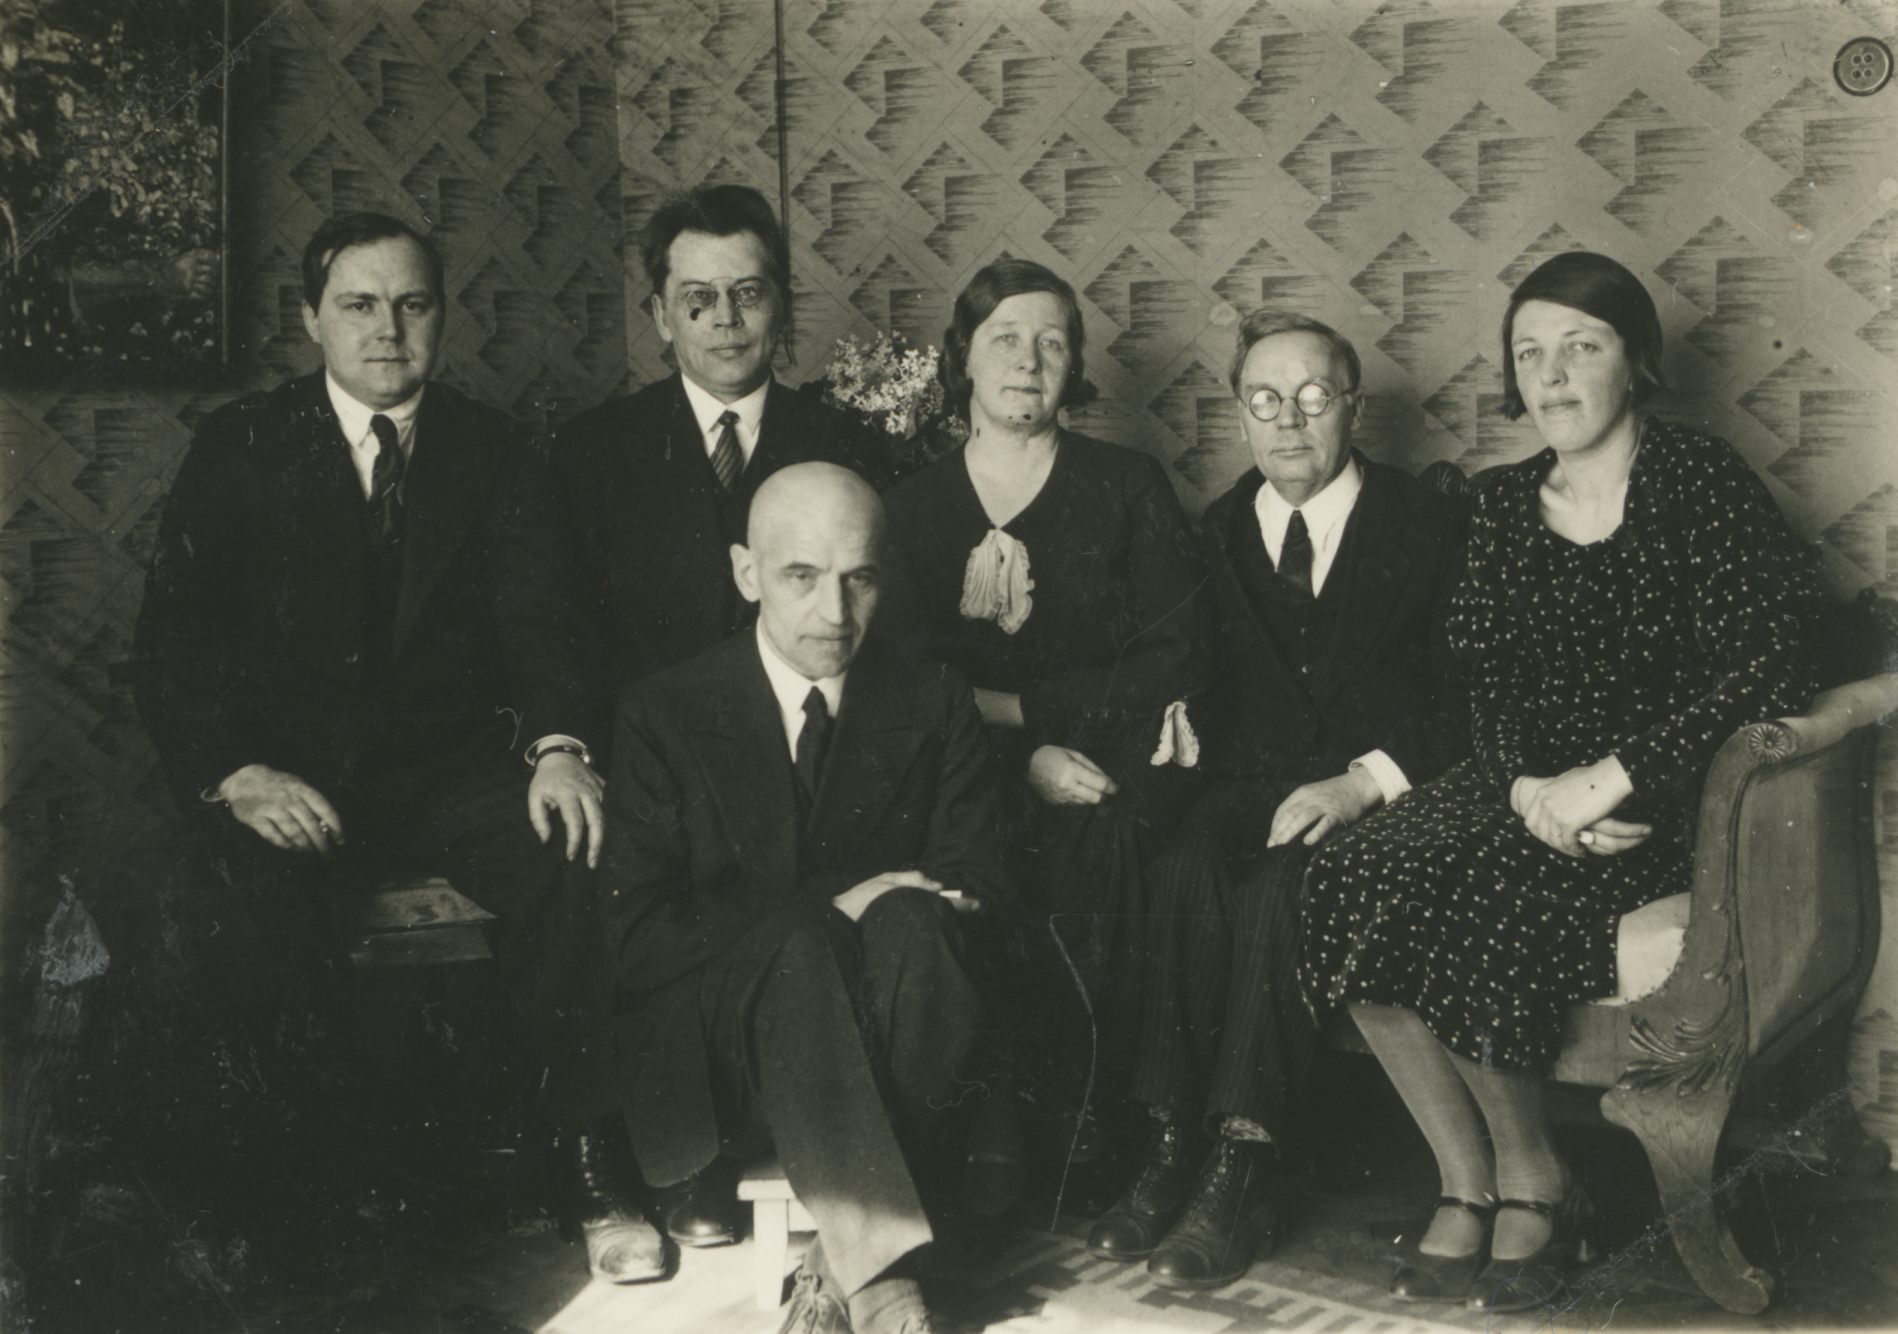 From the left: J. Taklaja, Fr. Tuglas, m. Under, e. Hubel, h. Hacker, front a. Adson [1933]